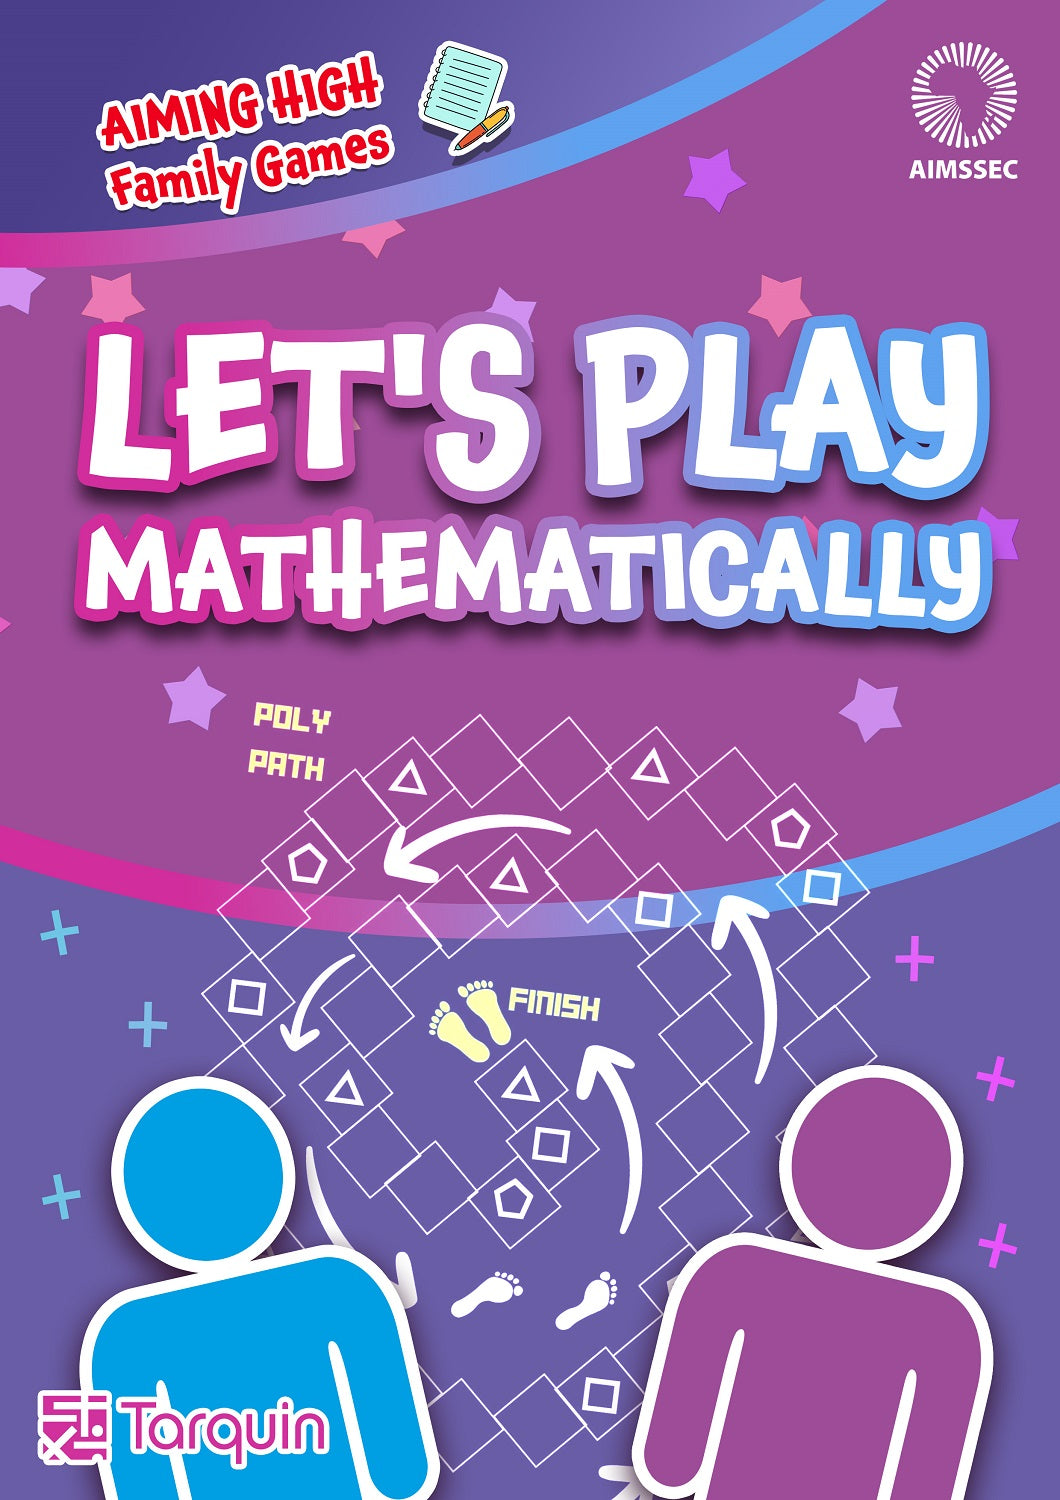 Let's Play Mathematically! Aiming High Family Games